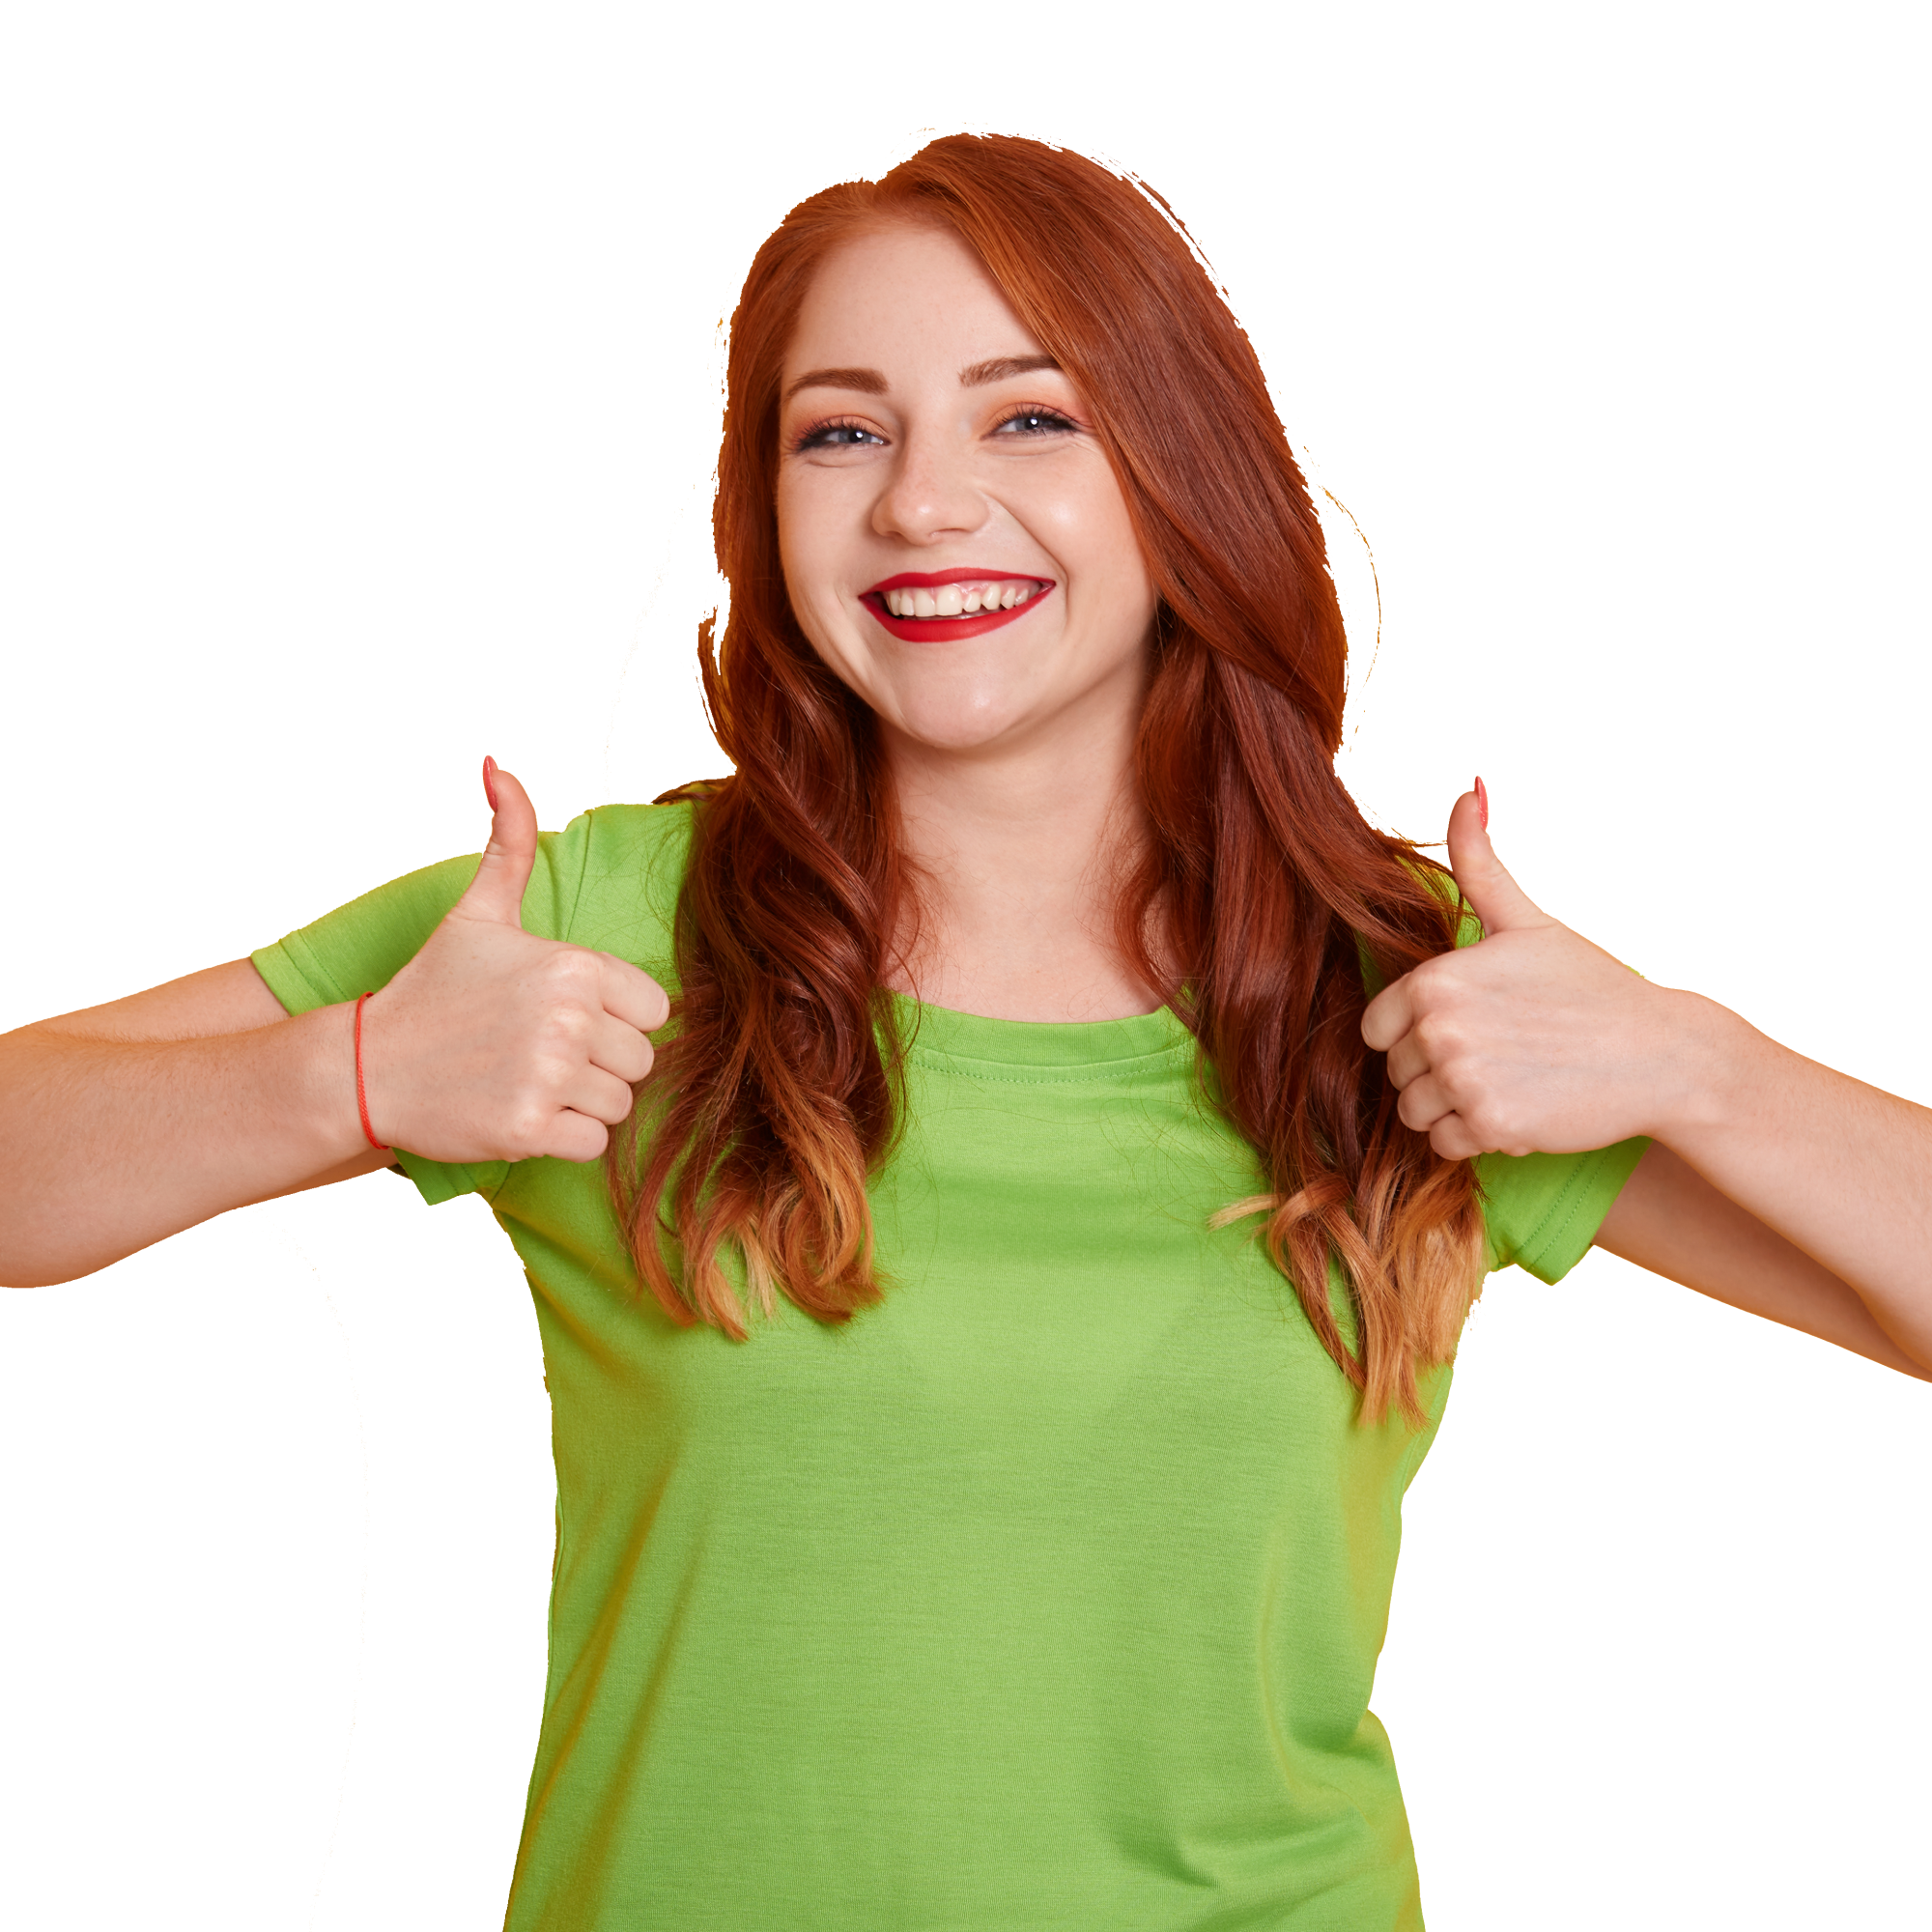 cheerful-lovely-girl-showing-thumbs-up-while-posing-isolated-red-haired-girl-in-green-t-shirt